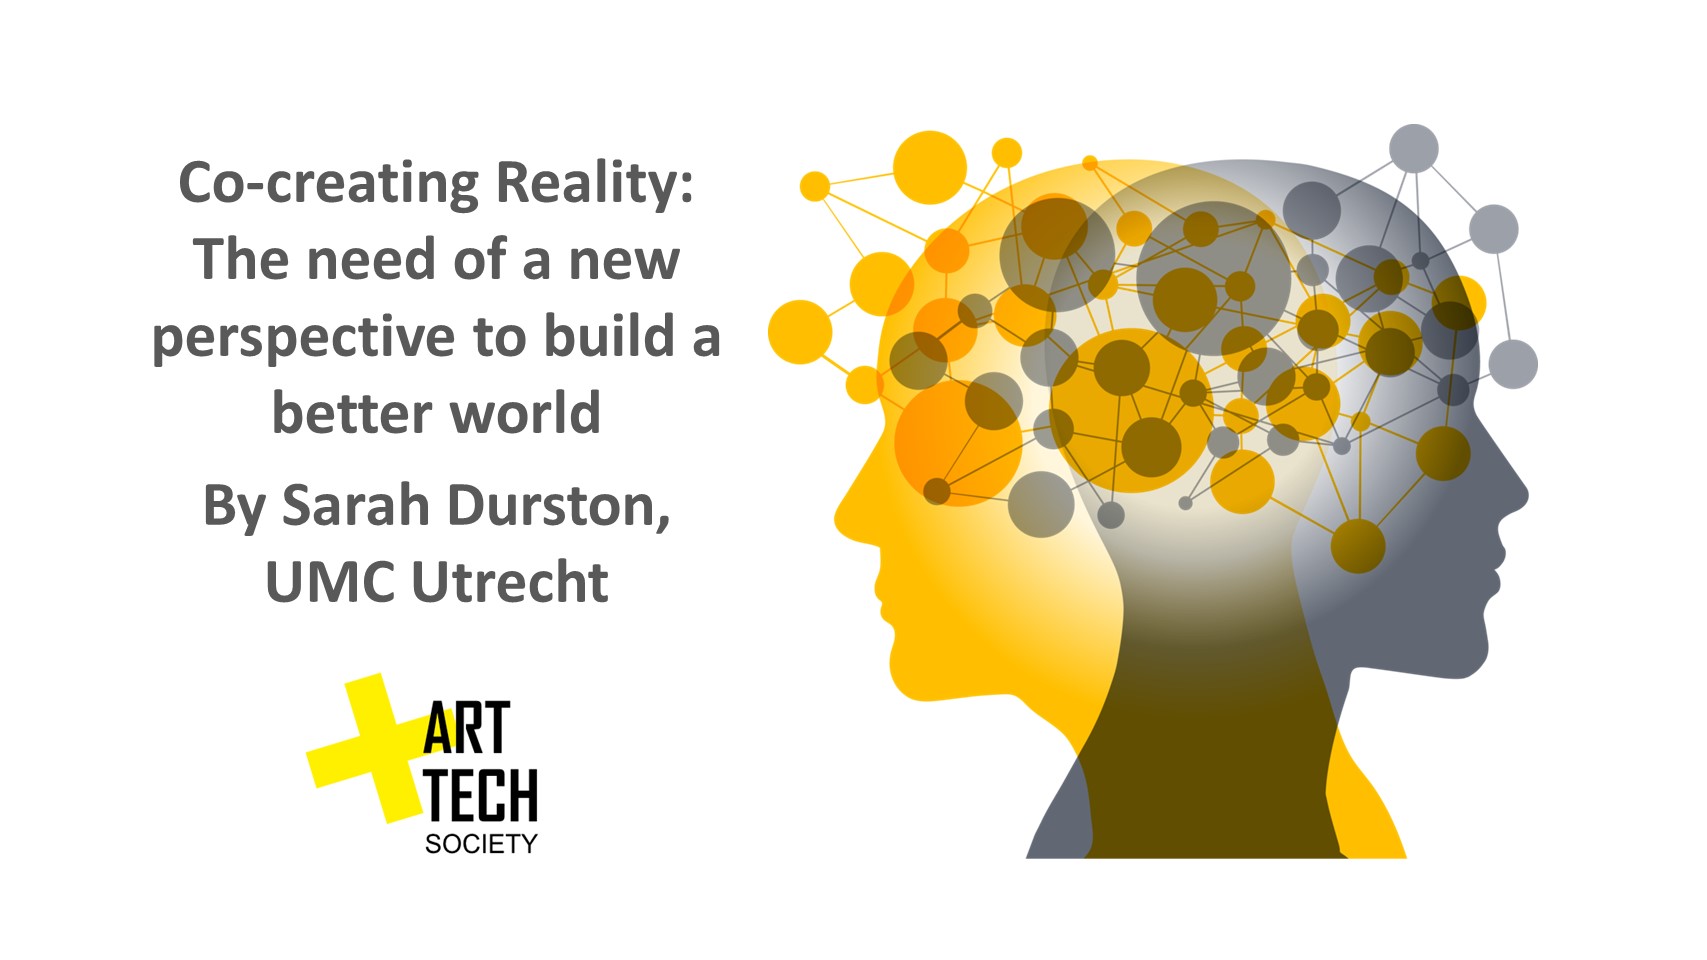 Co-creating Reality: the need of a new perspective to build a better world by Sarah Durston